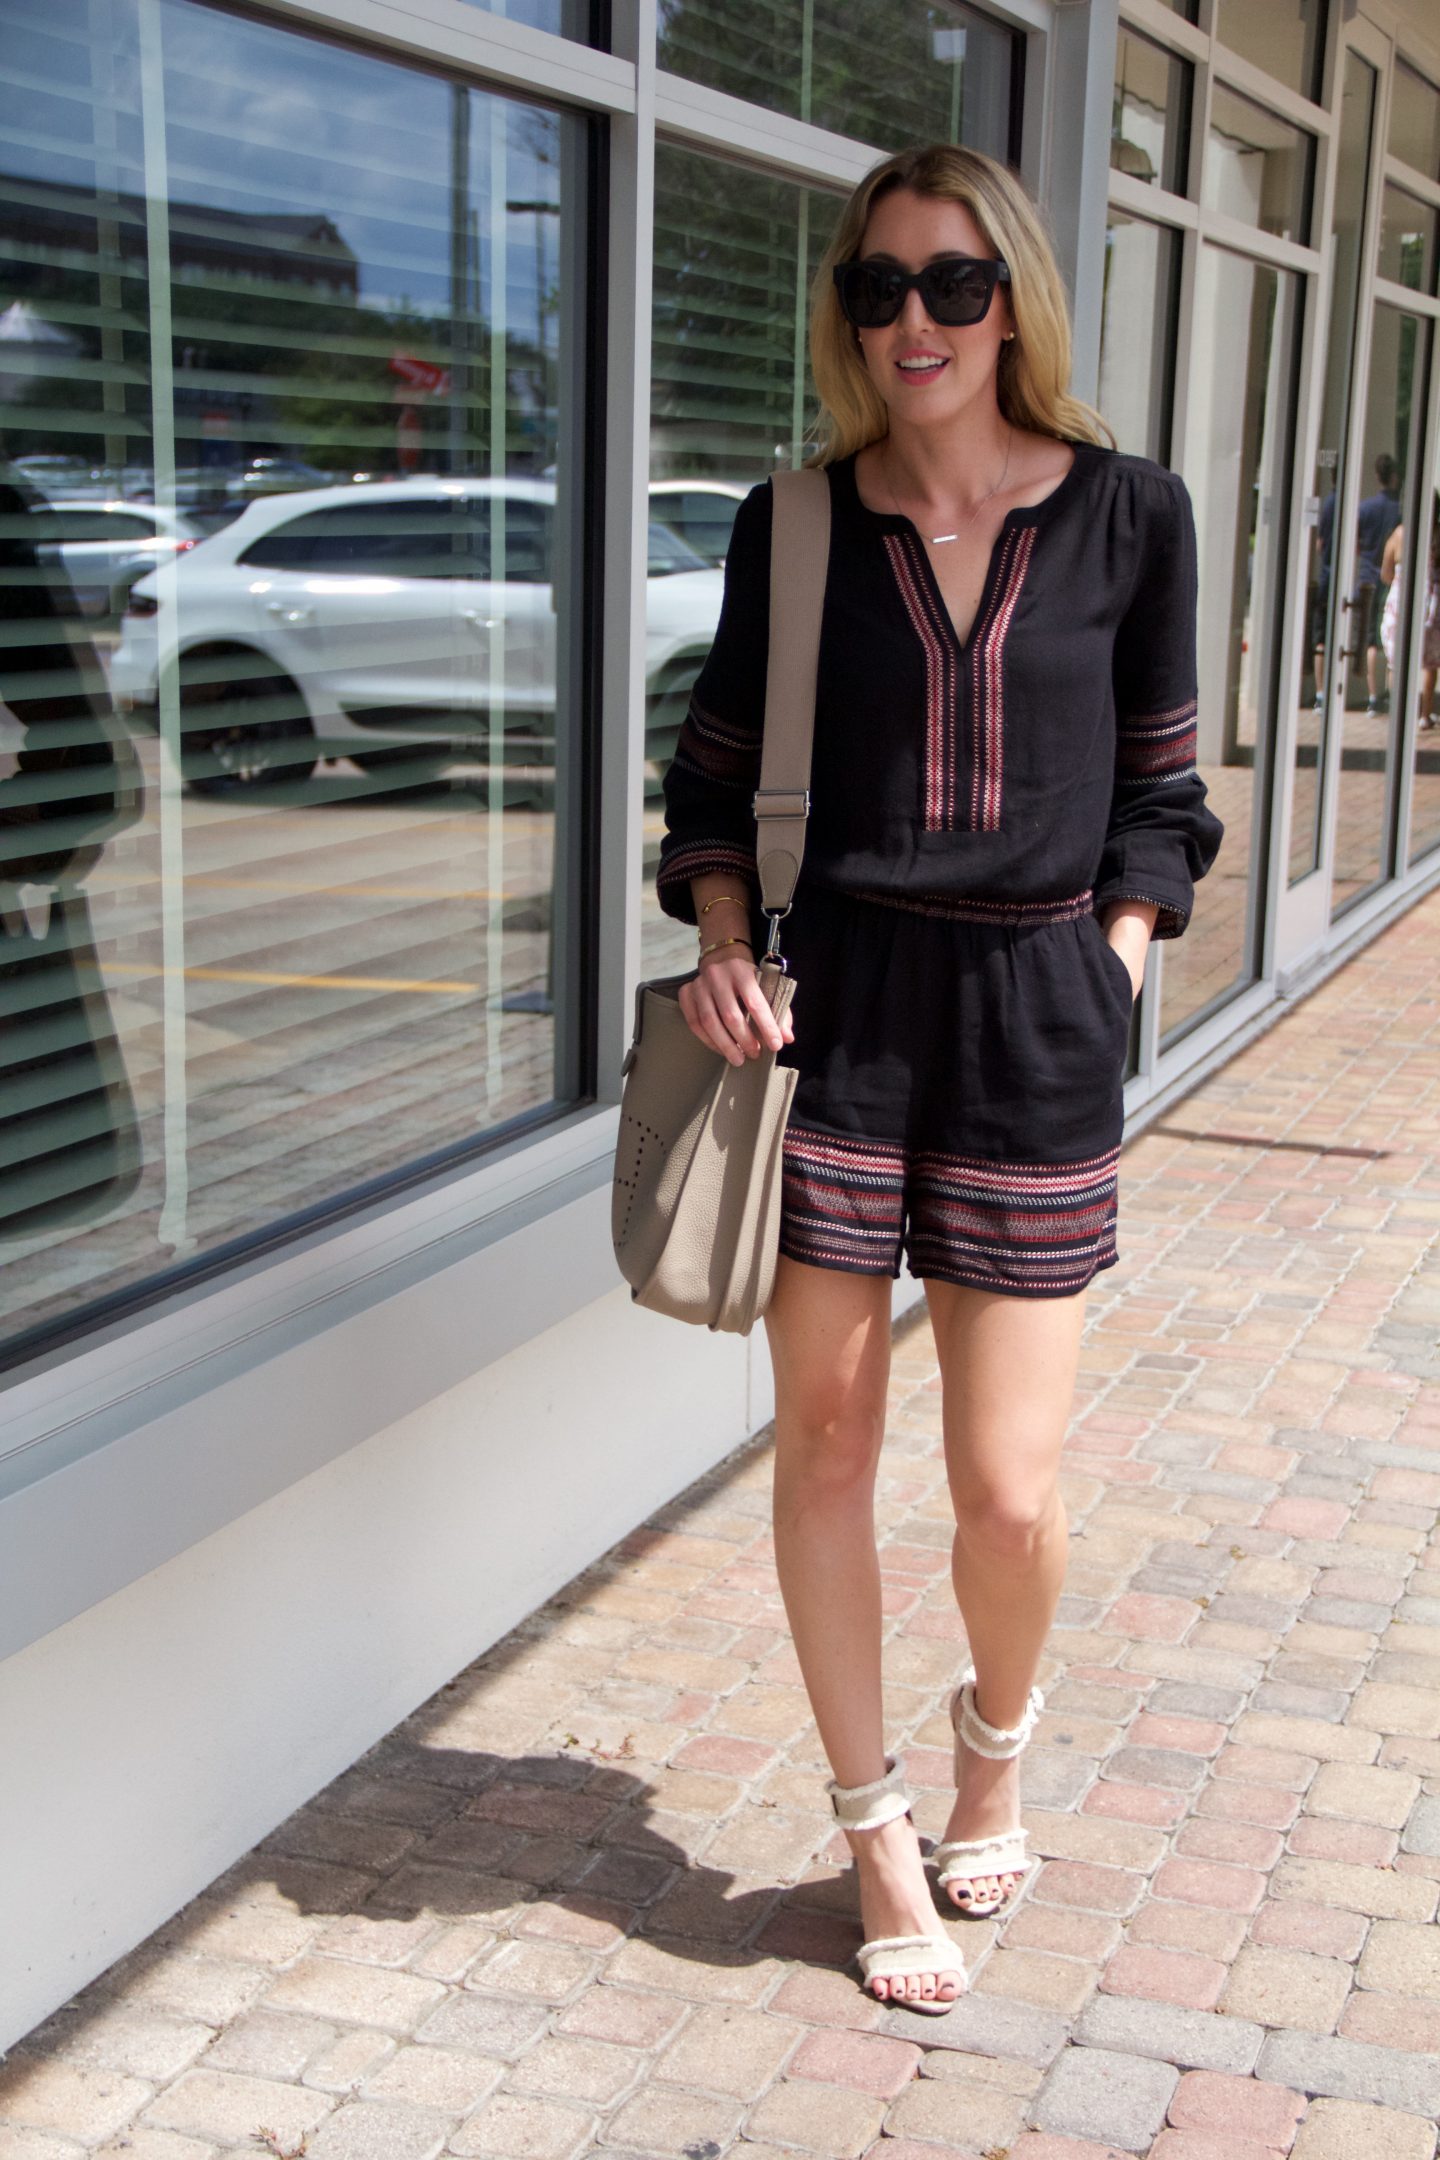 romp around-wearing this fave romper from LOFT